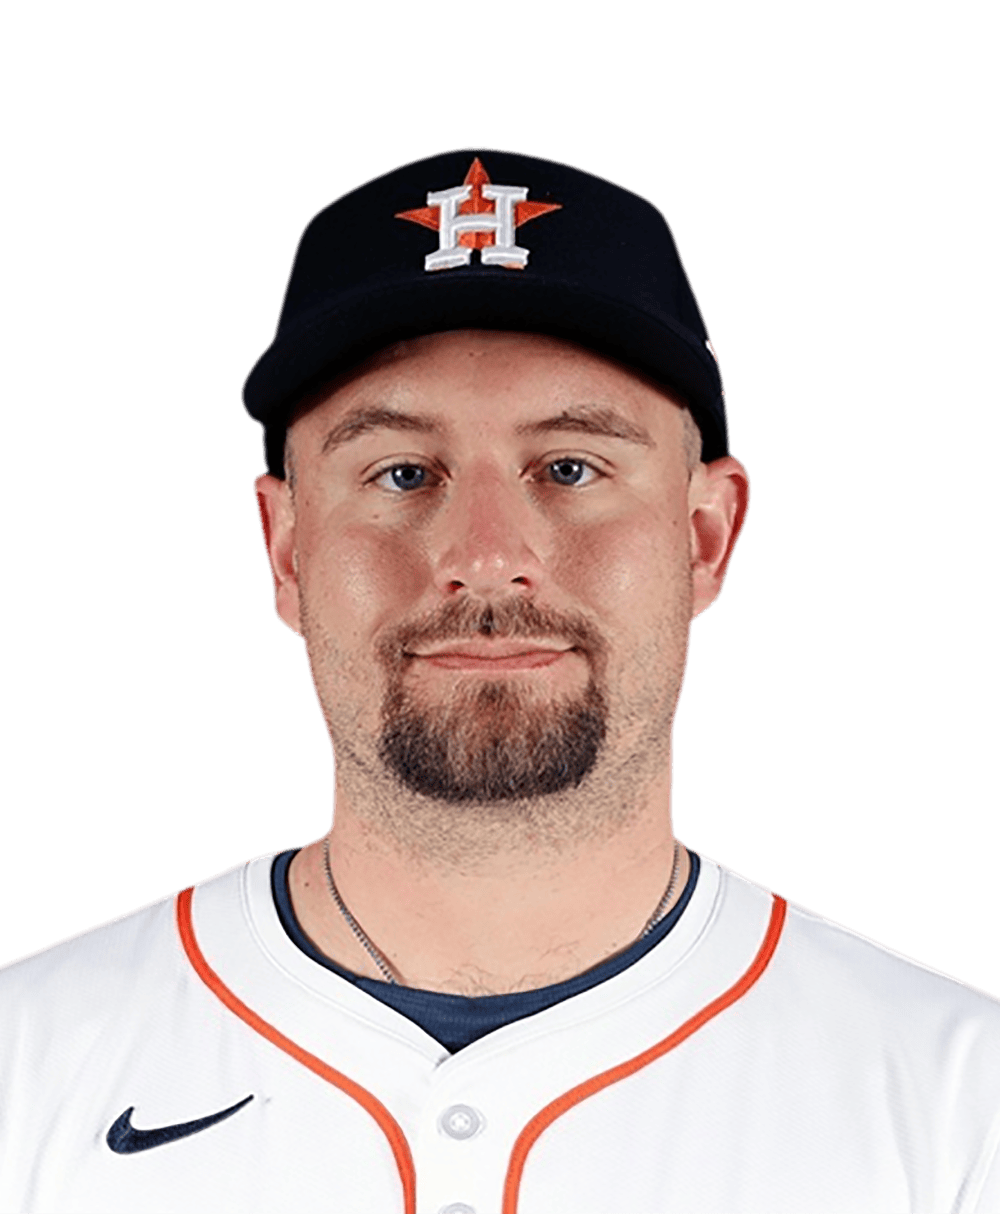 Astros call up Ronel Blanco after impressive Triple-A stint